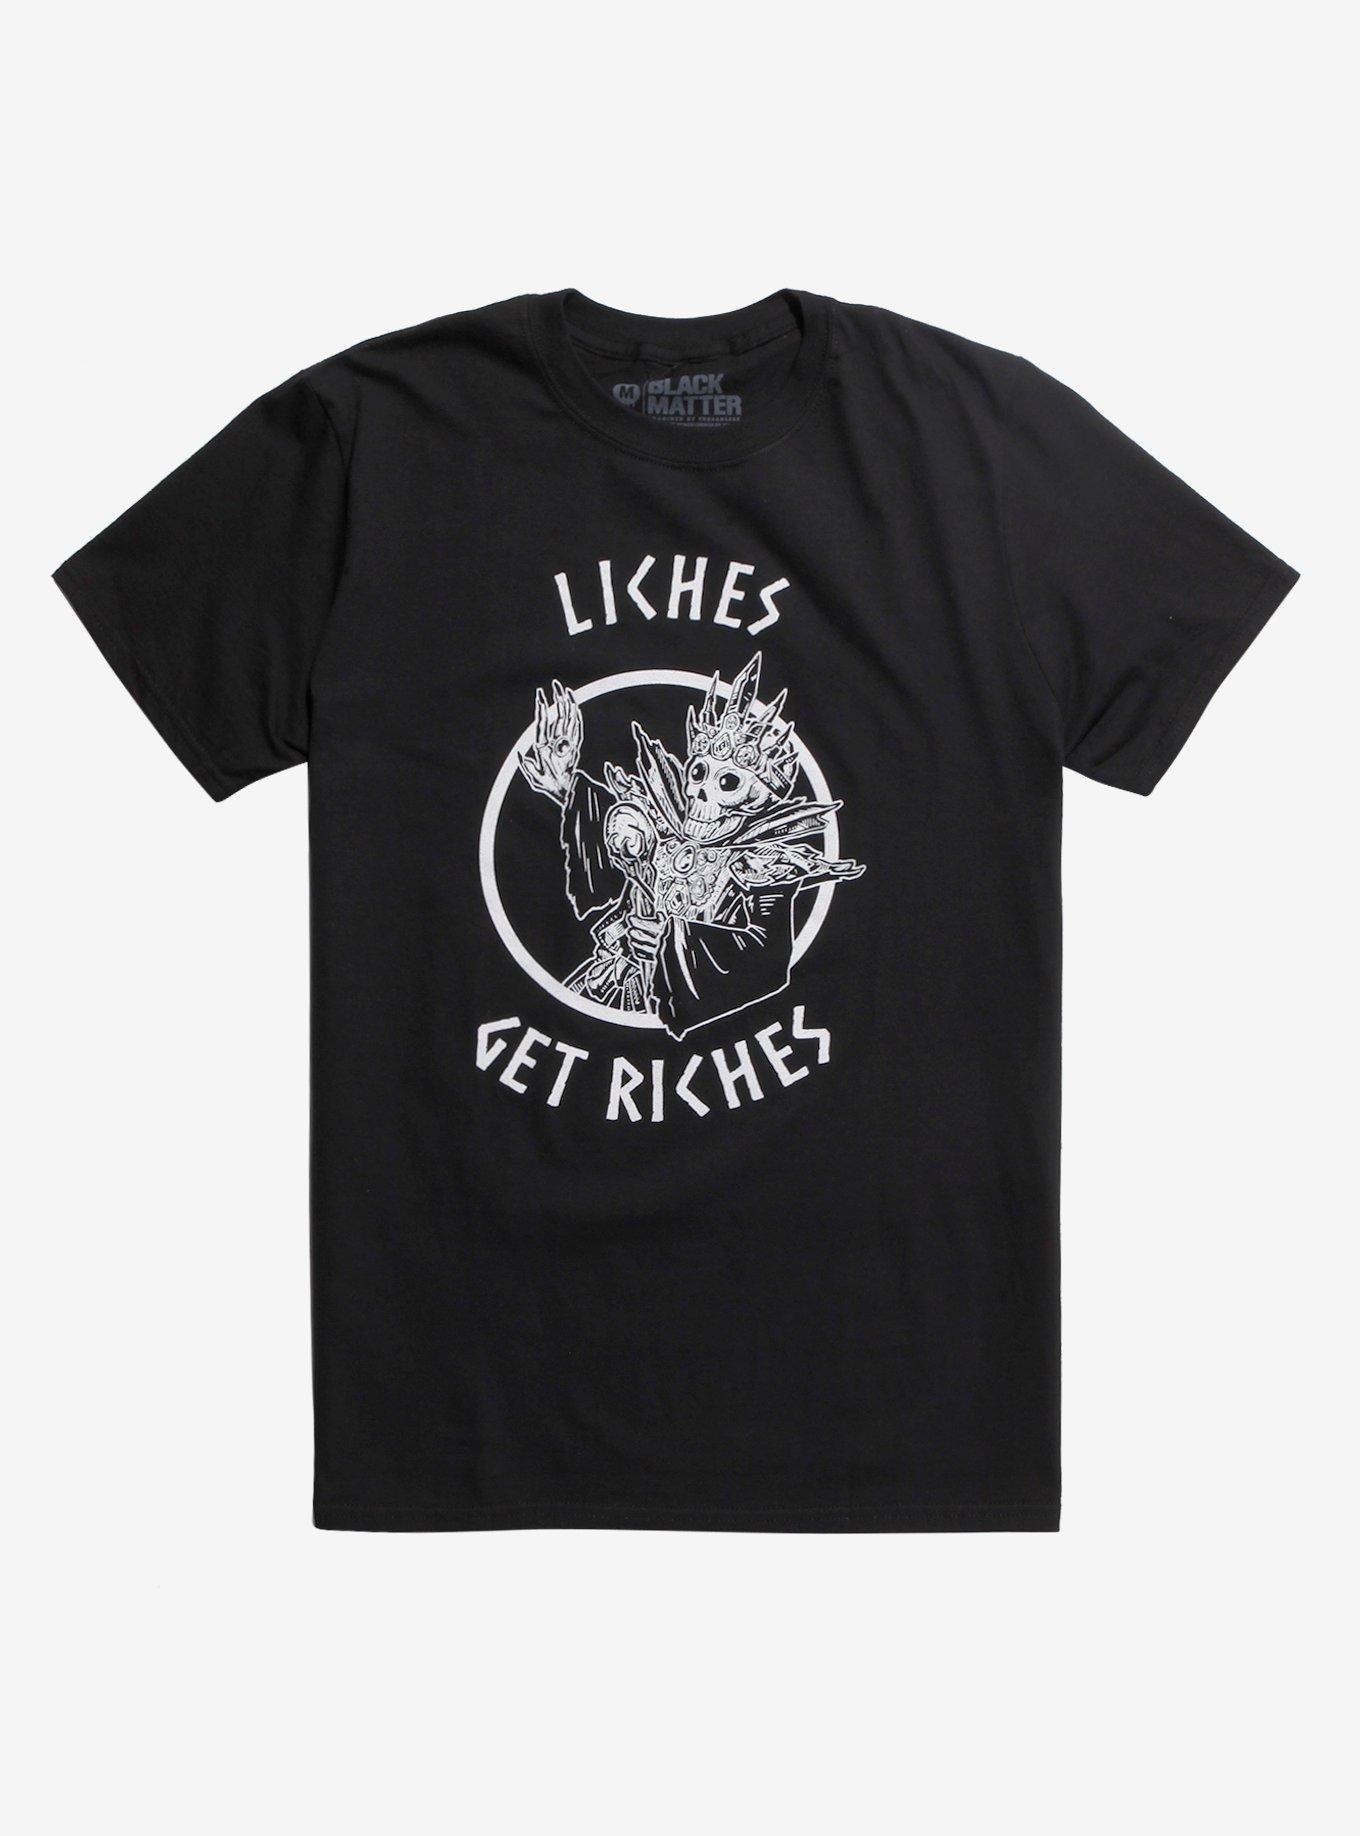 Liches Get Riches T-Shirt By Voidmerch Hot Topic Exclusive, WHITE, hi-res